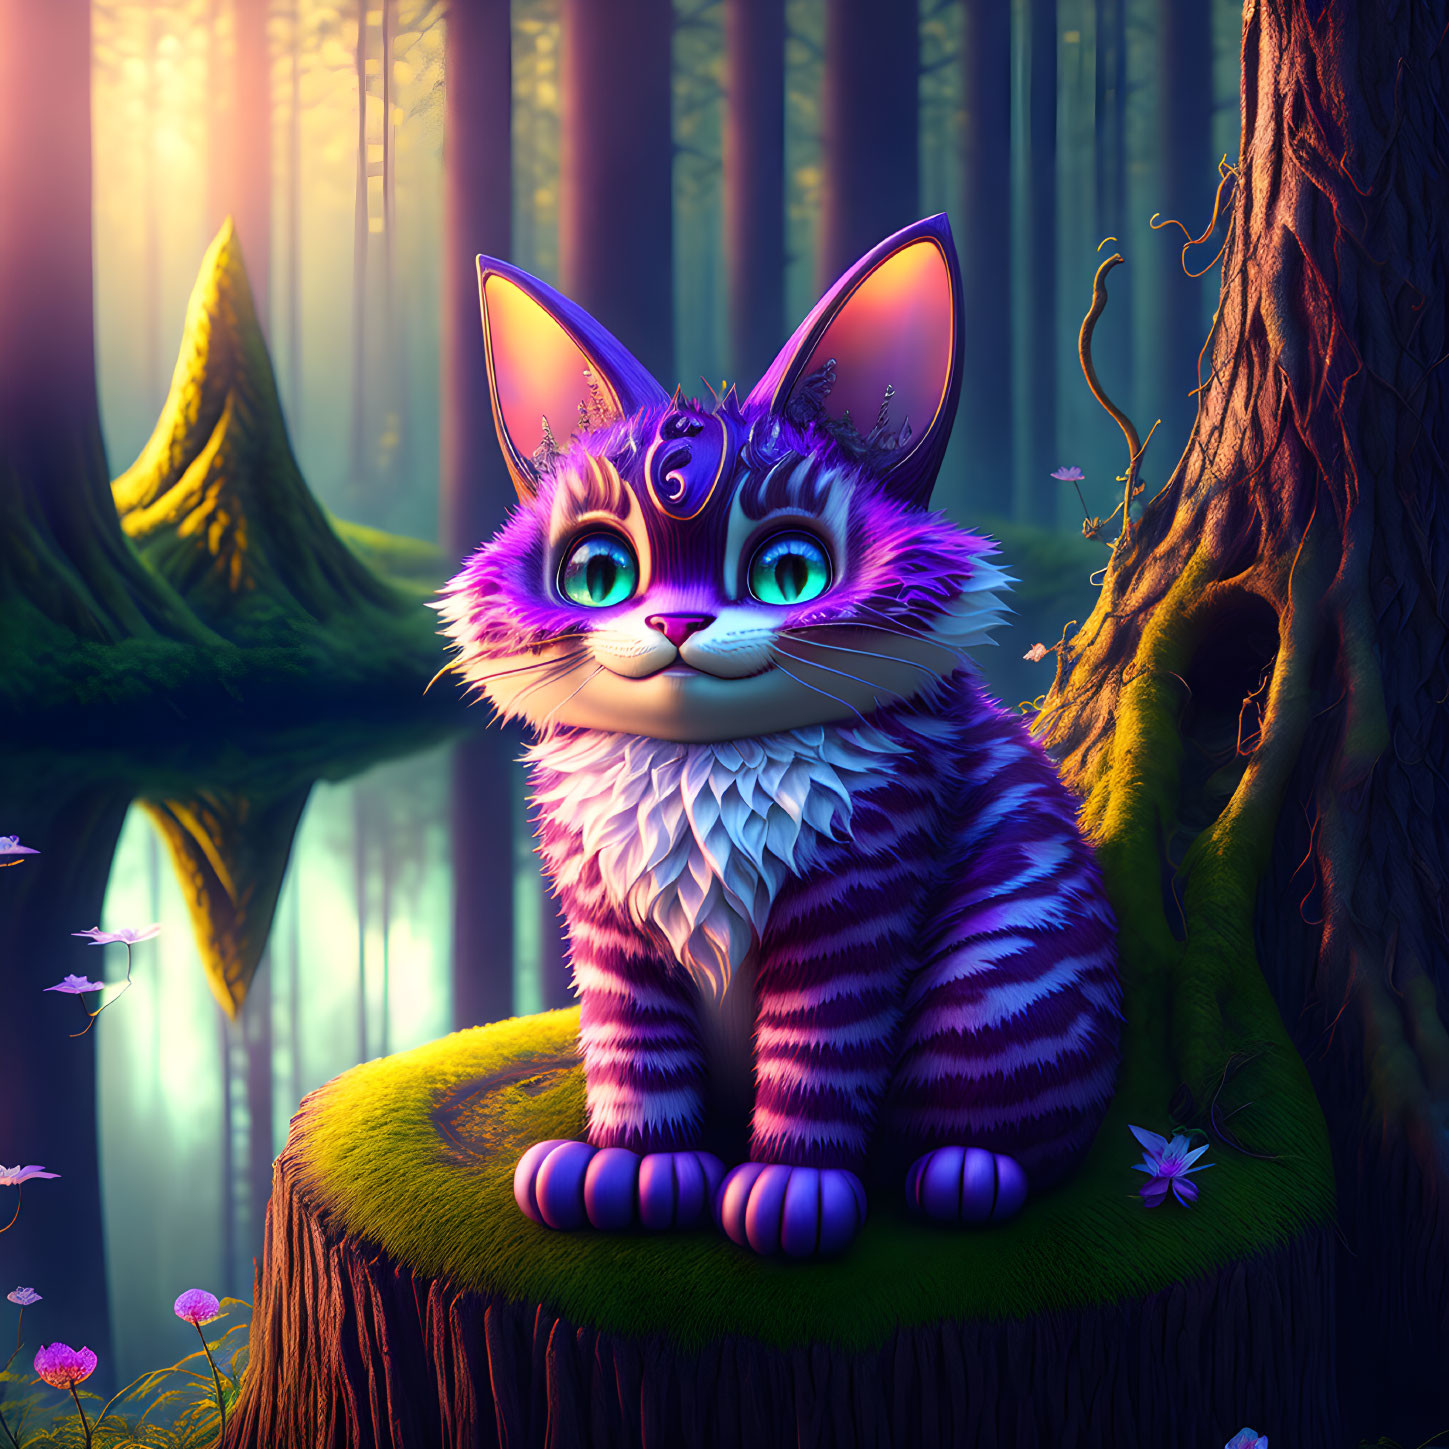 Colorful Illustration of Striped Cat in Enchanted Forest